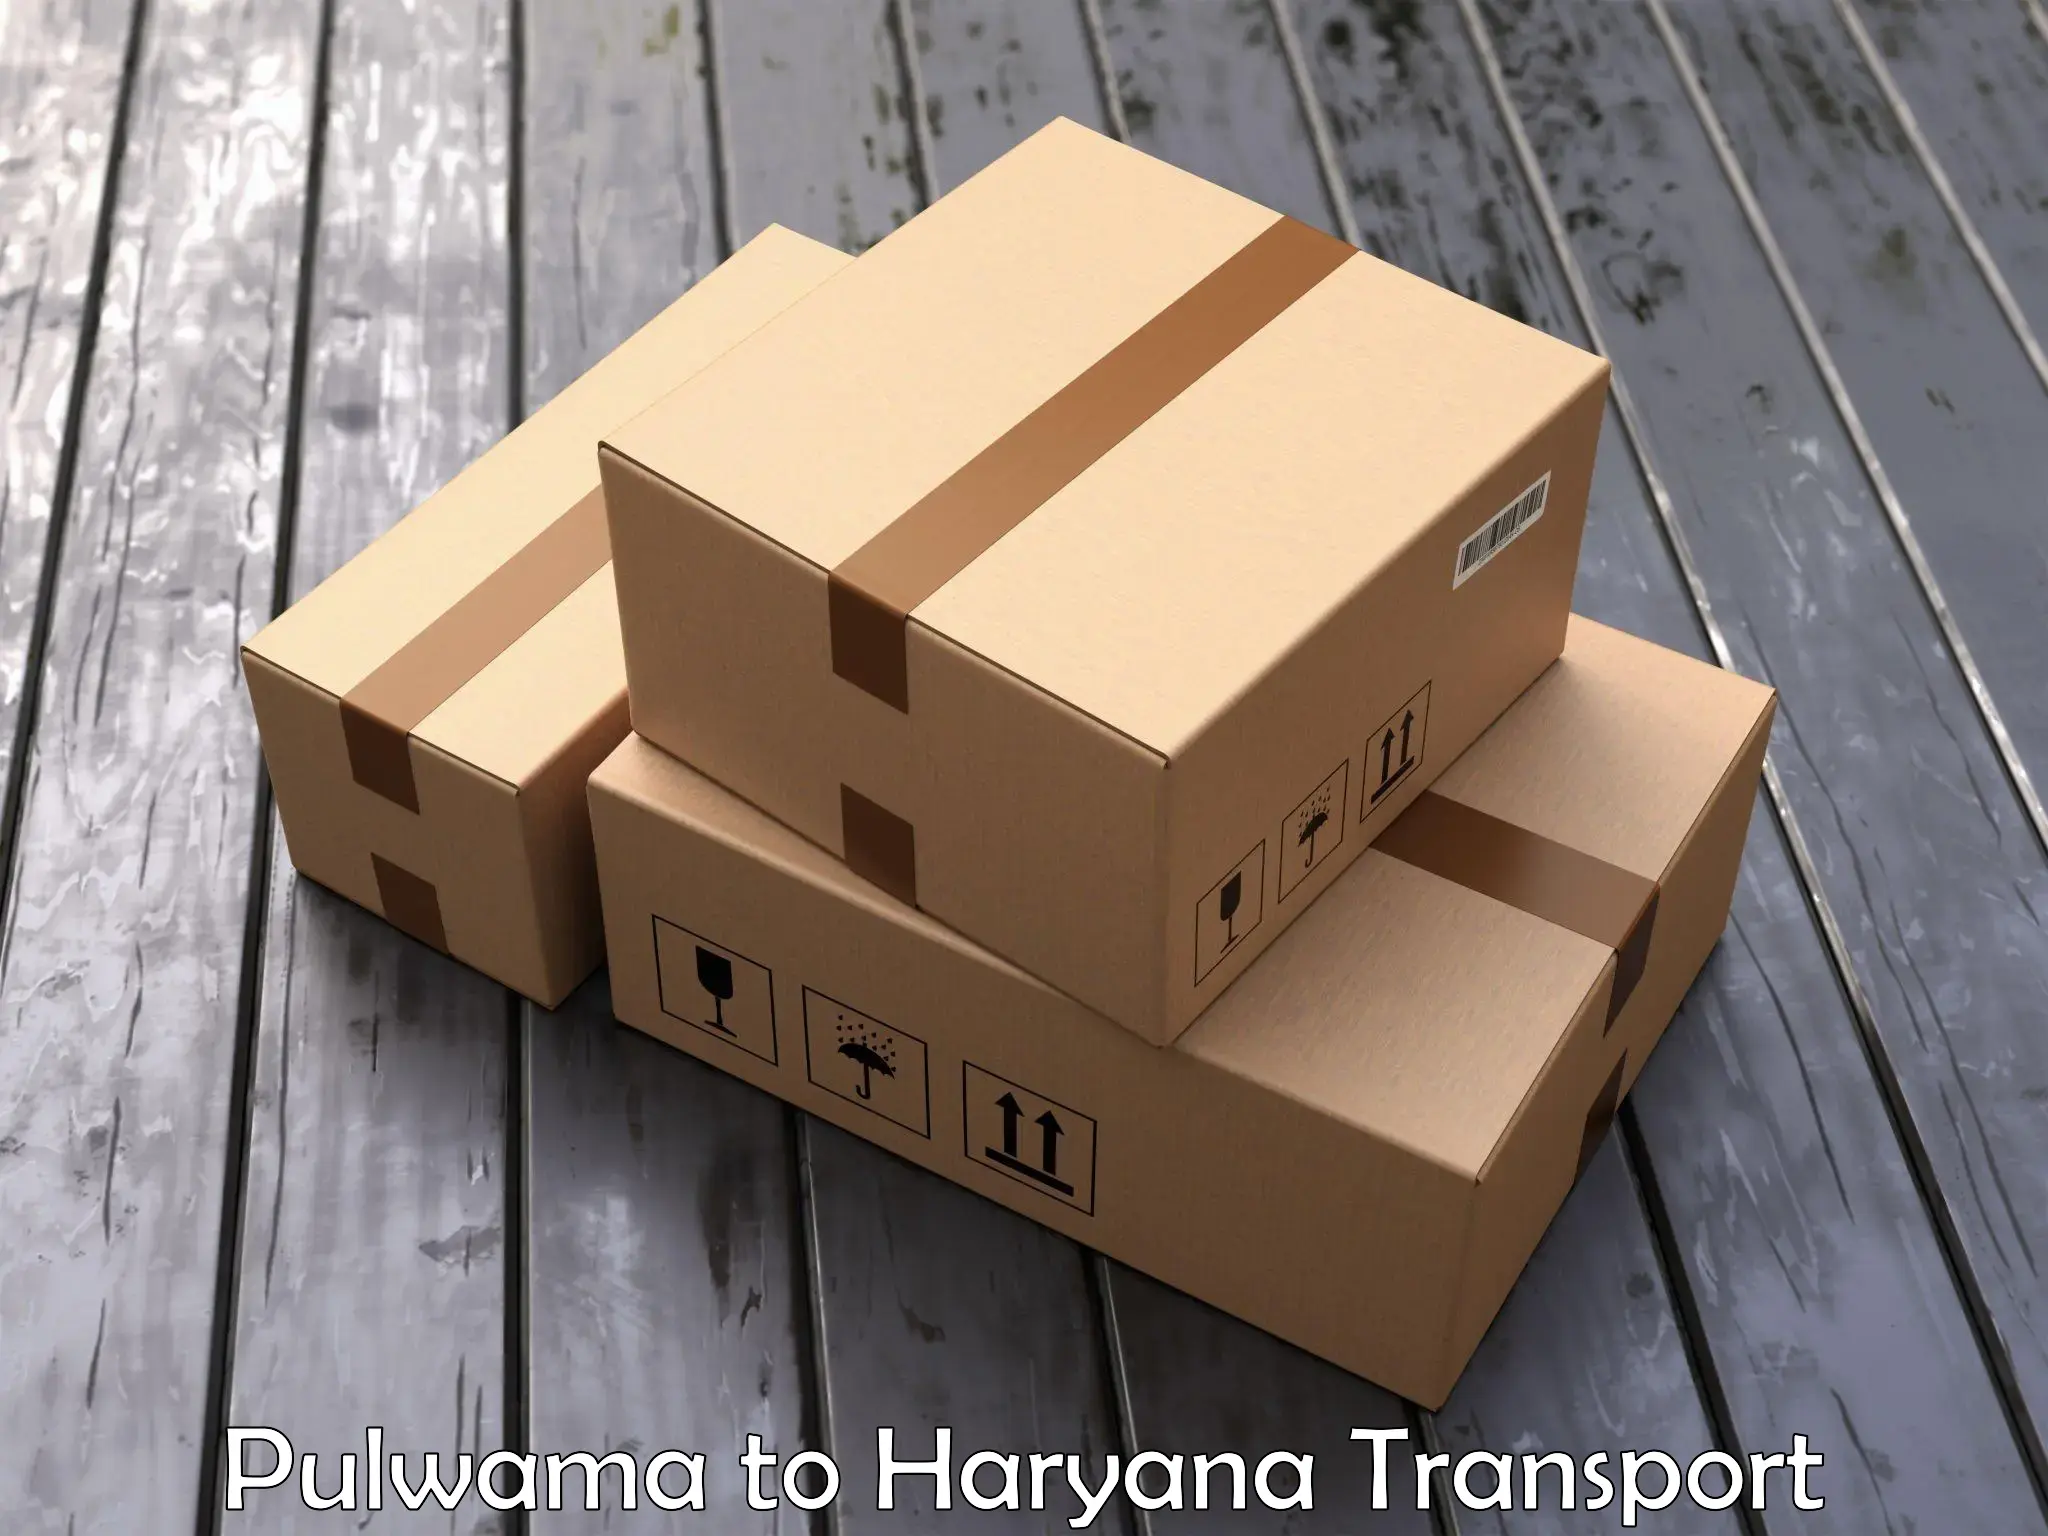 Transport in sharing Pulwama to NCR Haryana